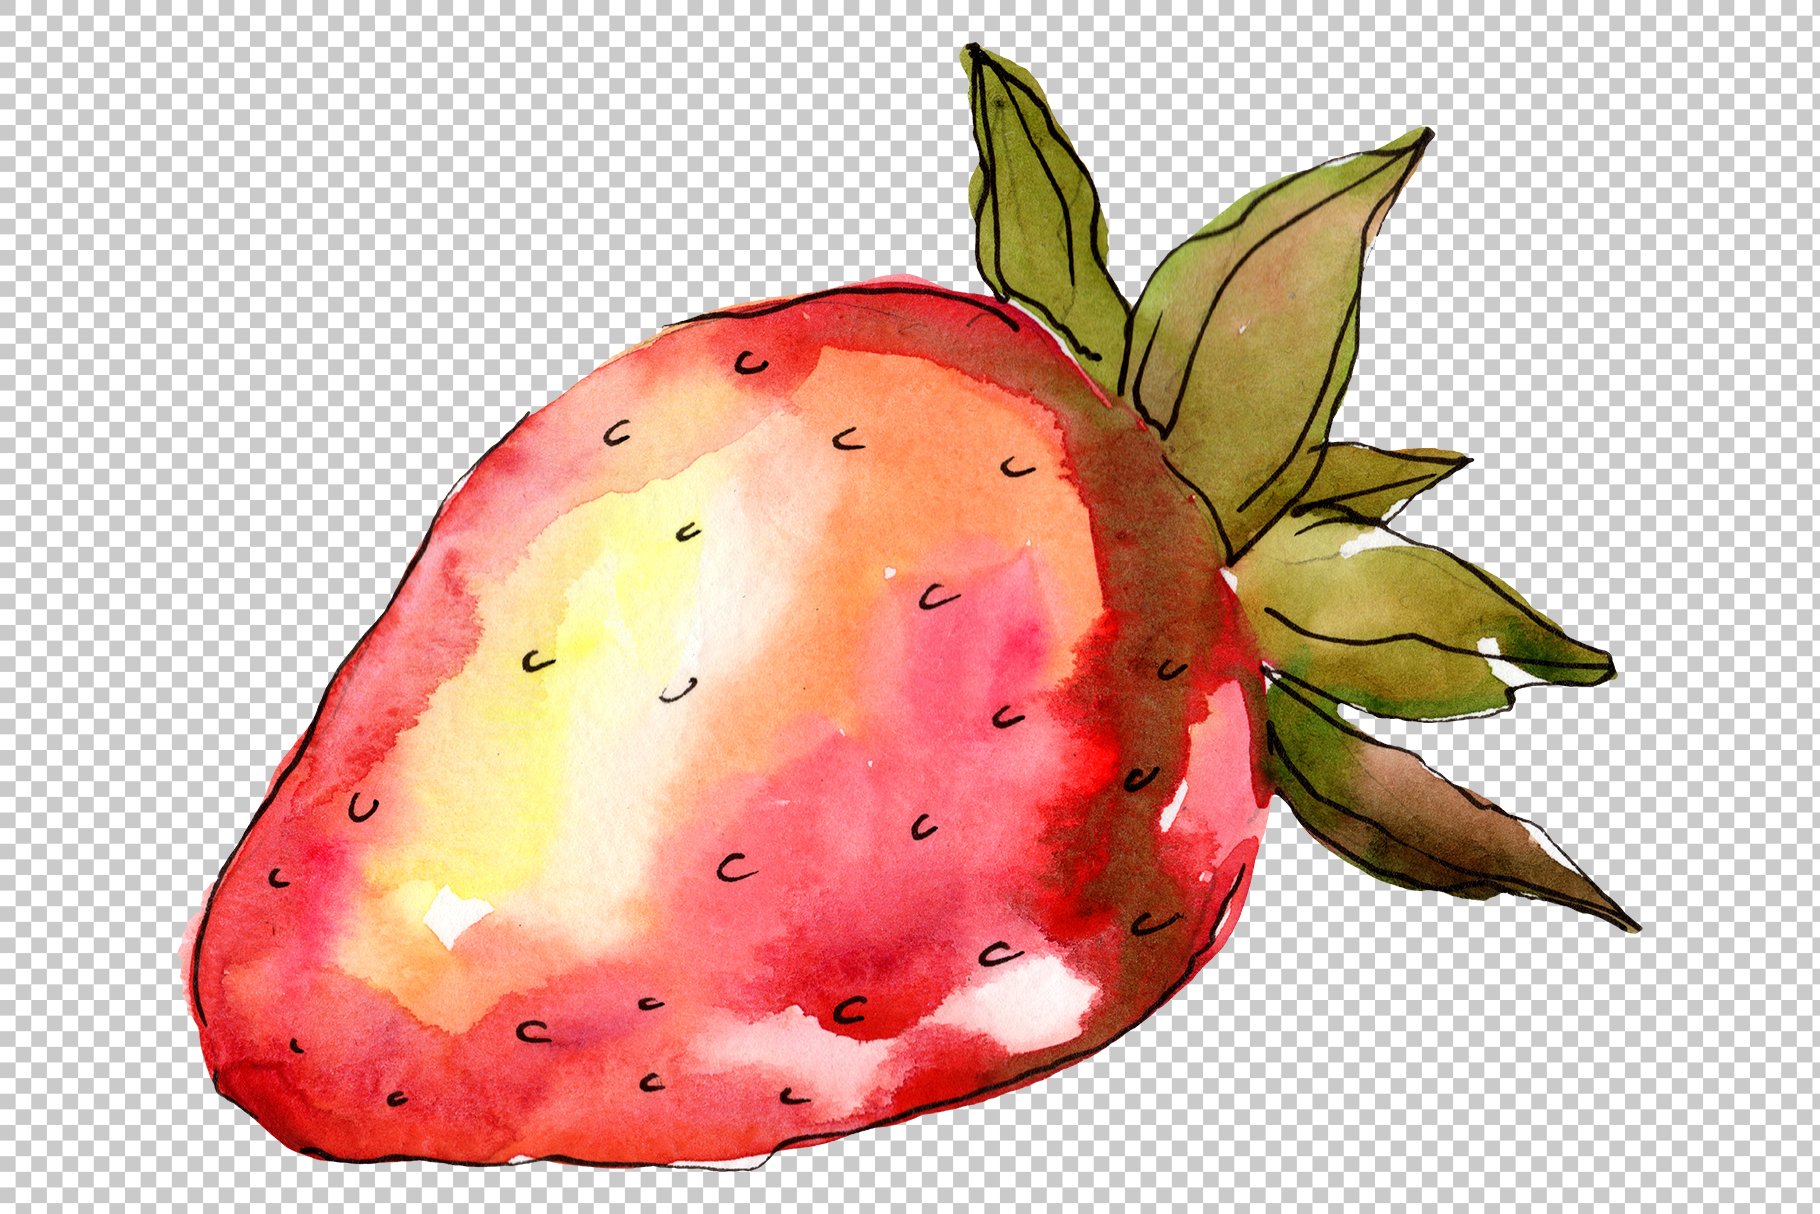 So cute strawberry on a transparent background.